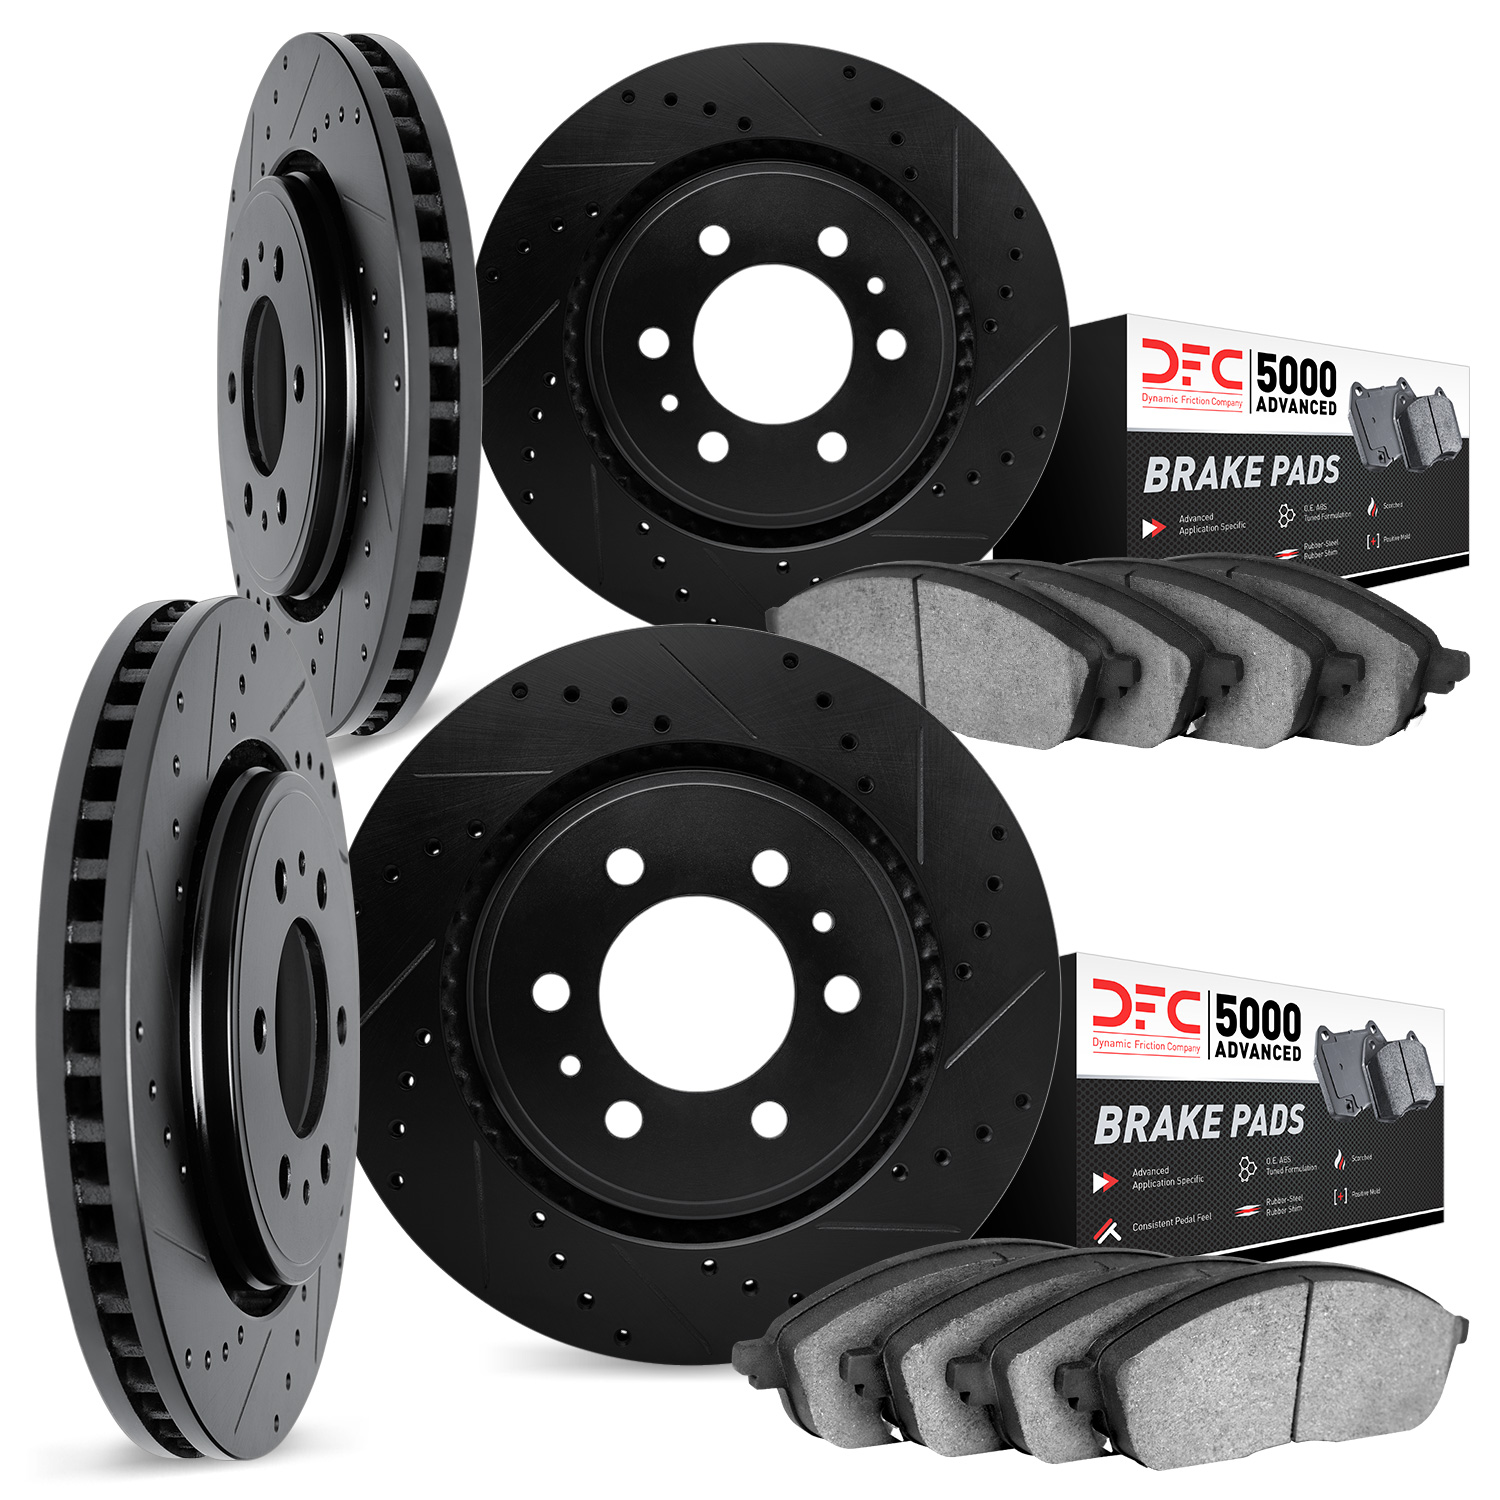 8504-48037 Drilled/Slotted Brake Rotors w/5000 Advanced Brake Pads Kit [Black], 2006-2009 GM, Position: Front and Rear